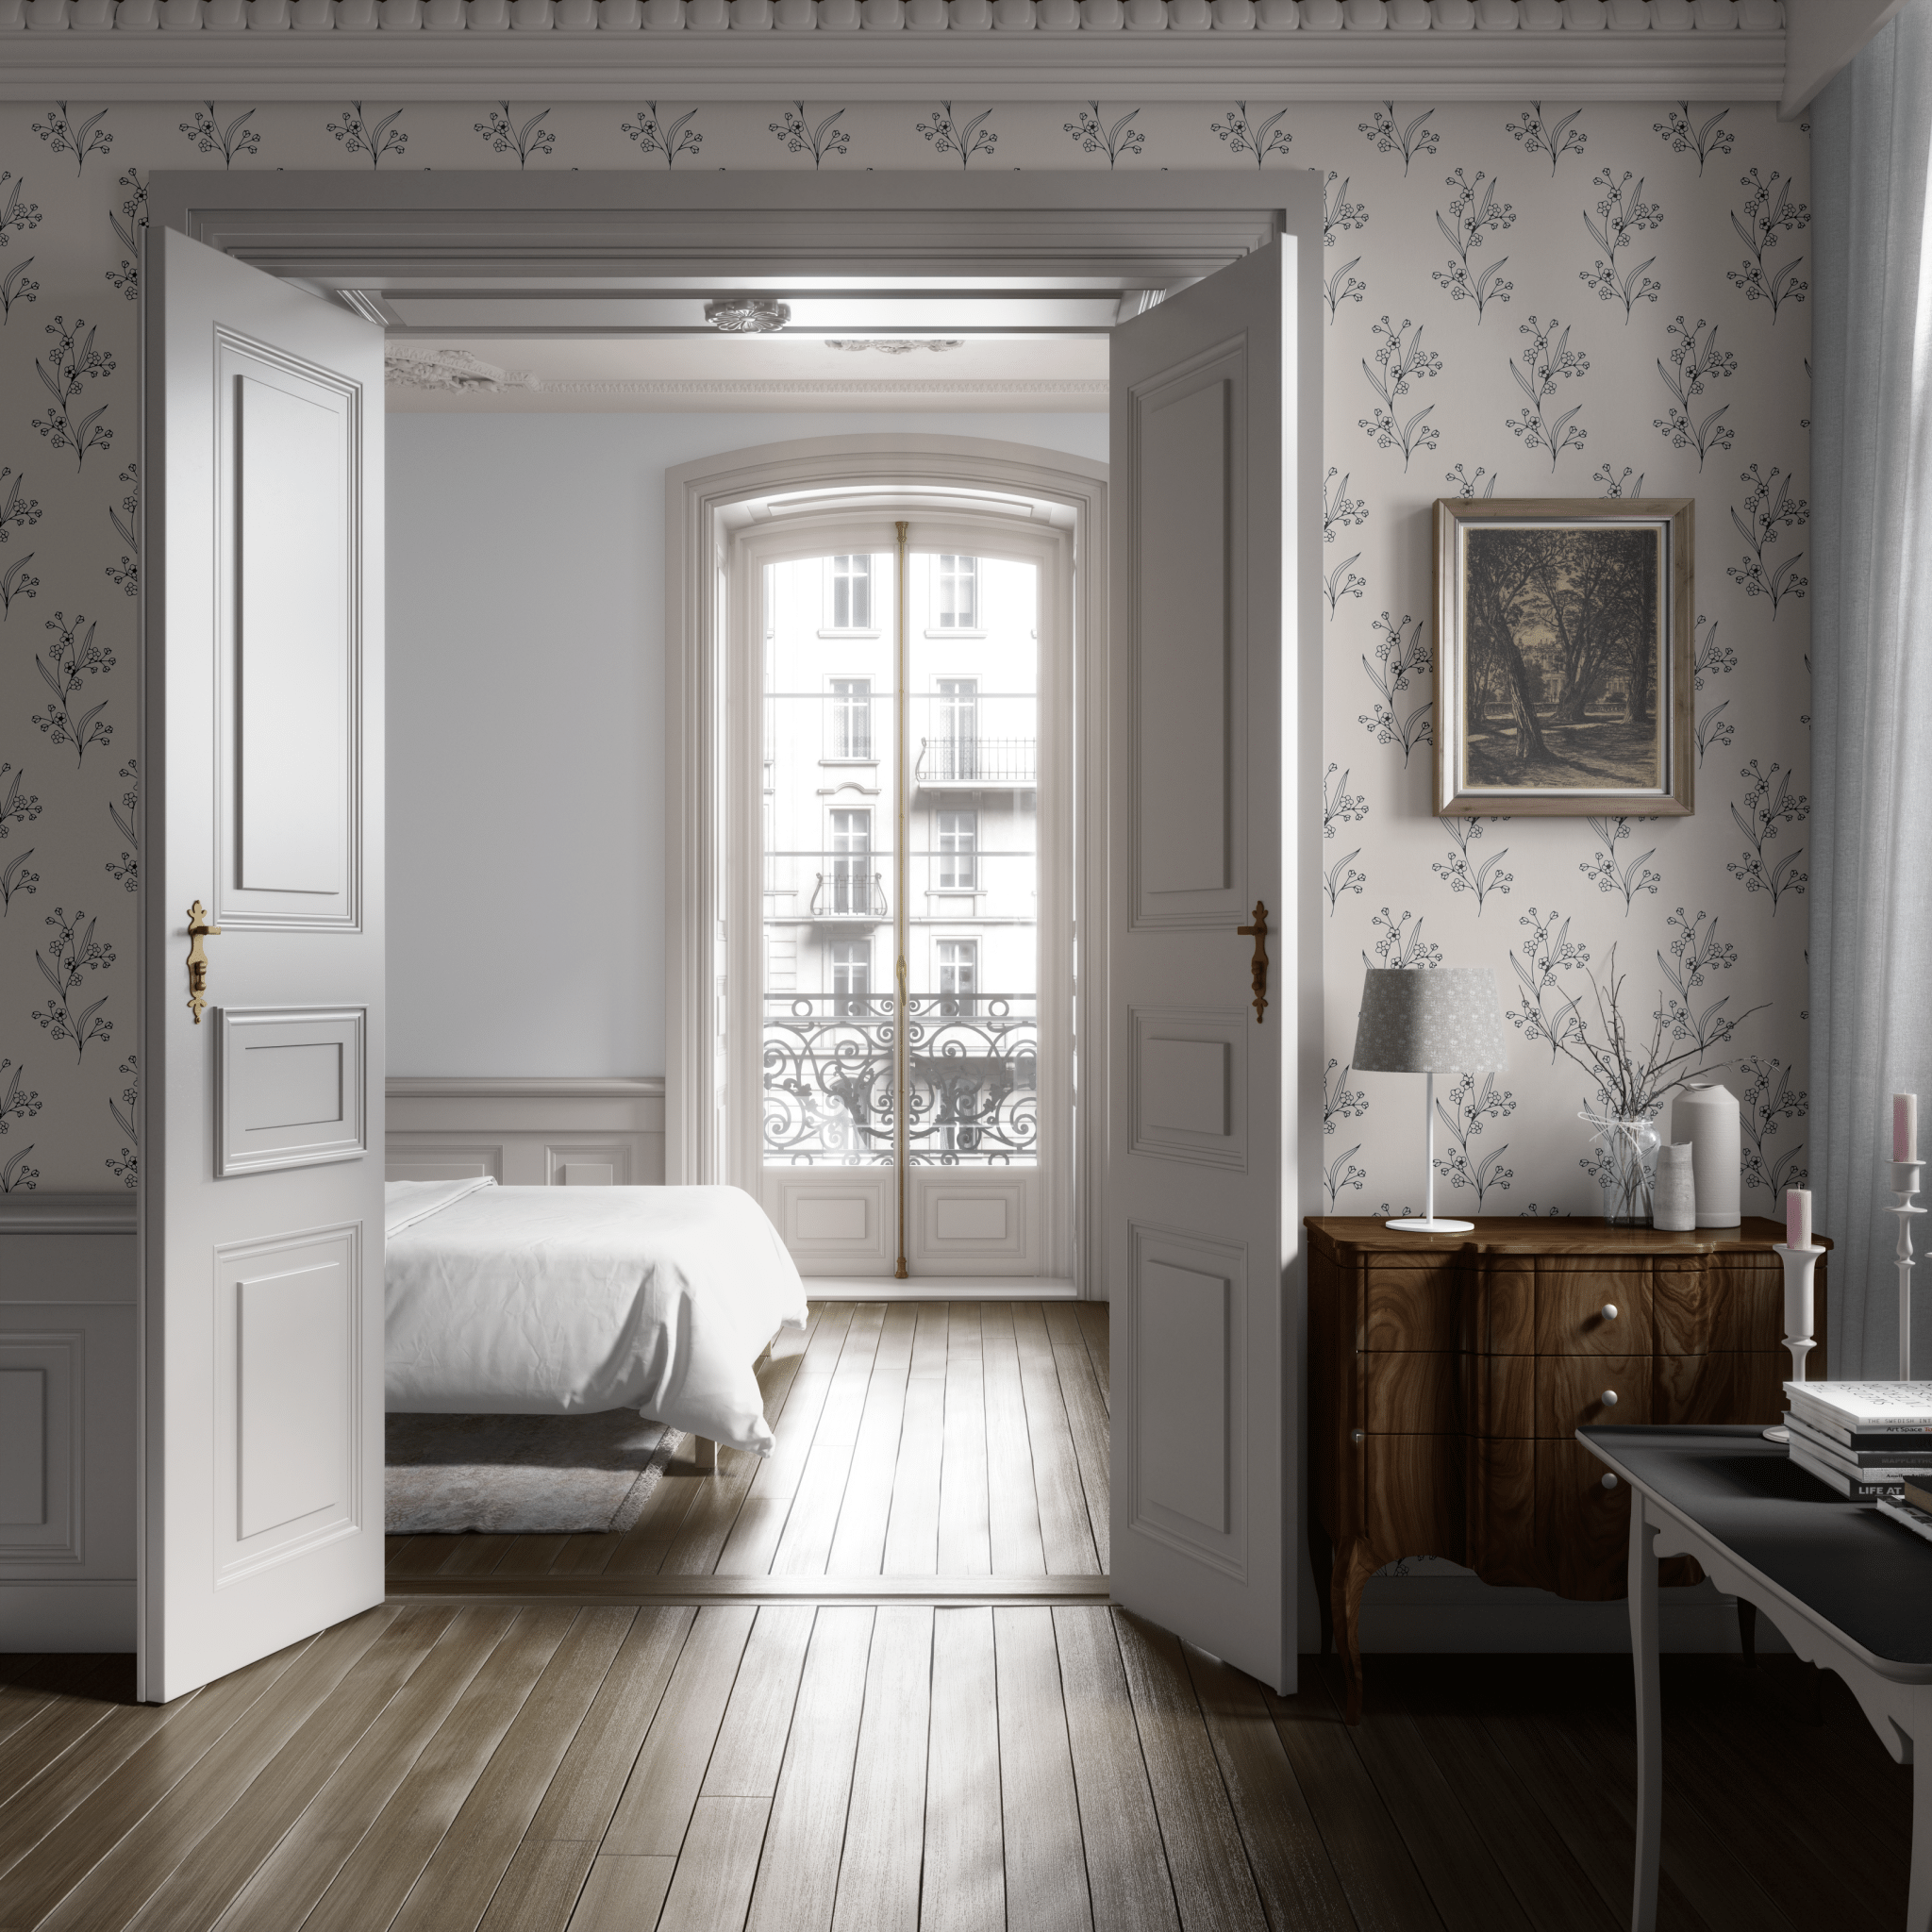 A bedroom with sketched twig peel and stick wallpaper, white bedding, and traditional wooden furniture